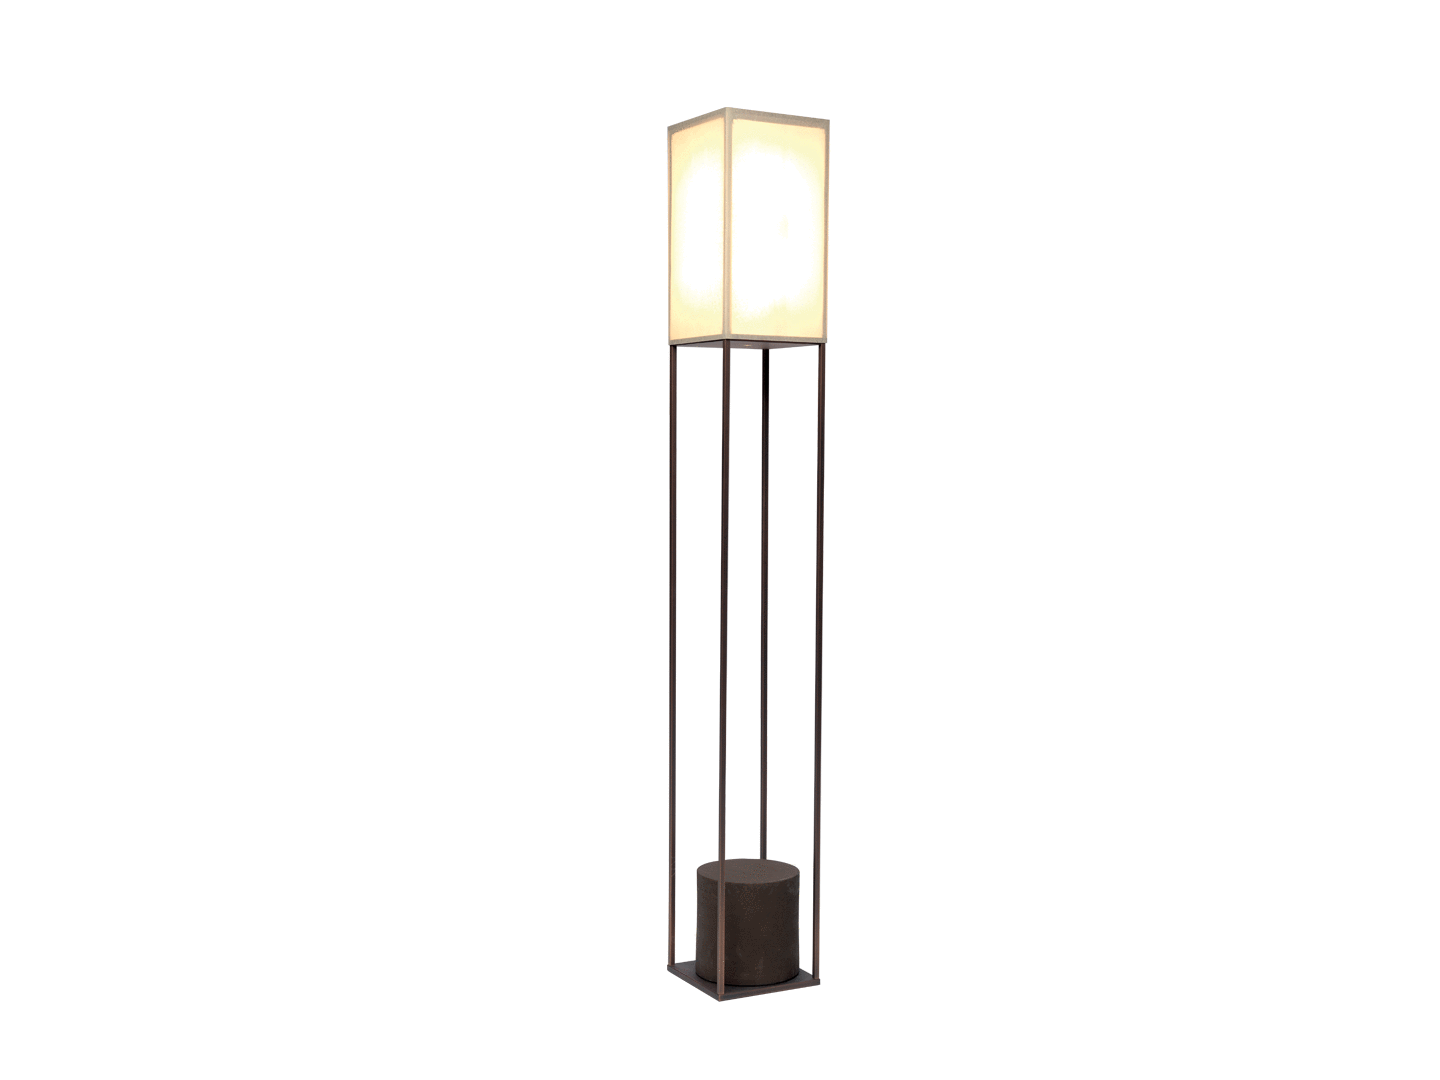 For Hall Lamp